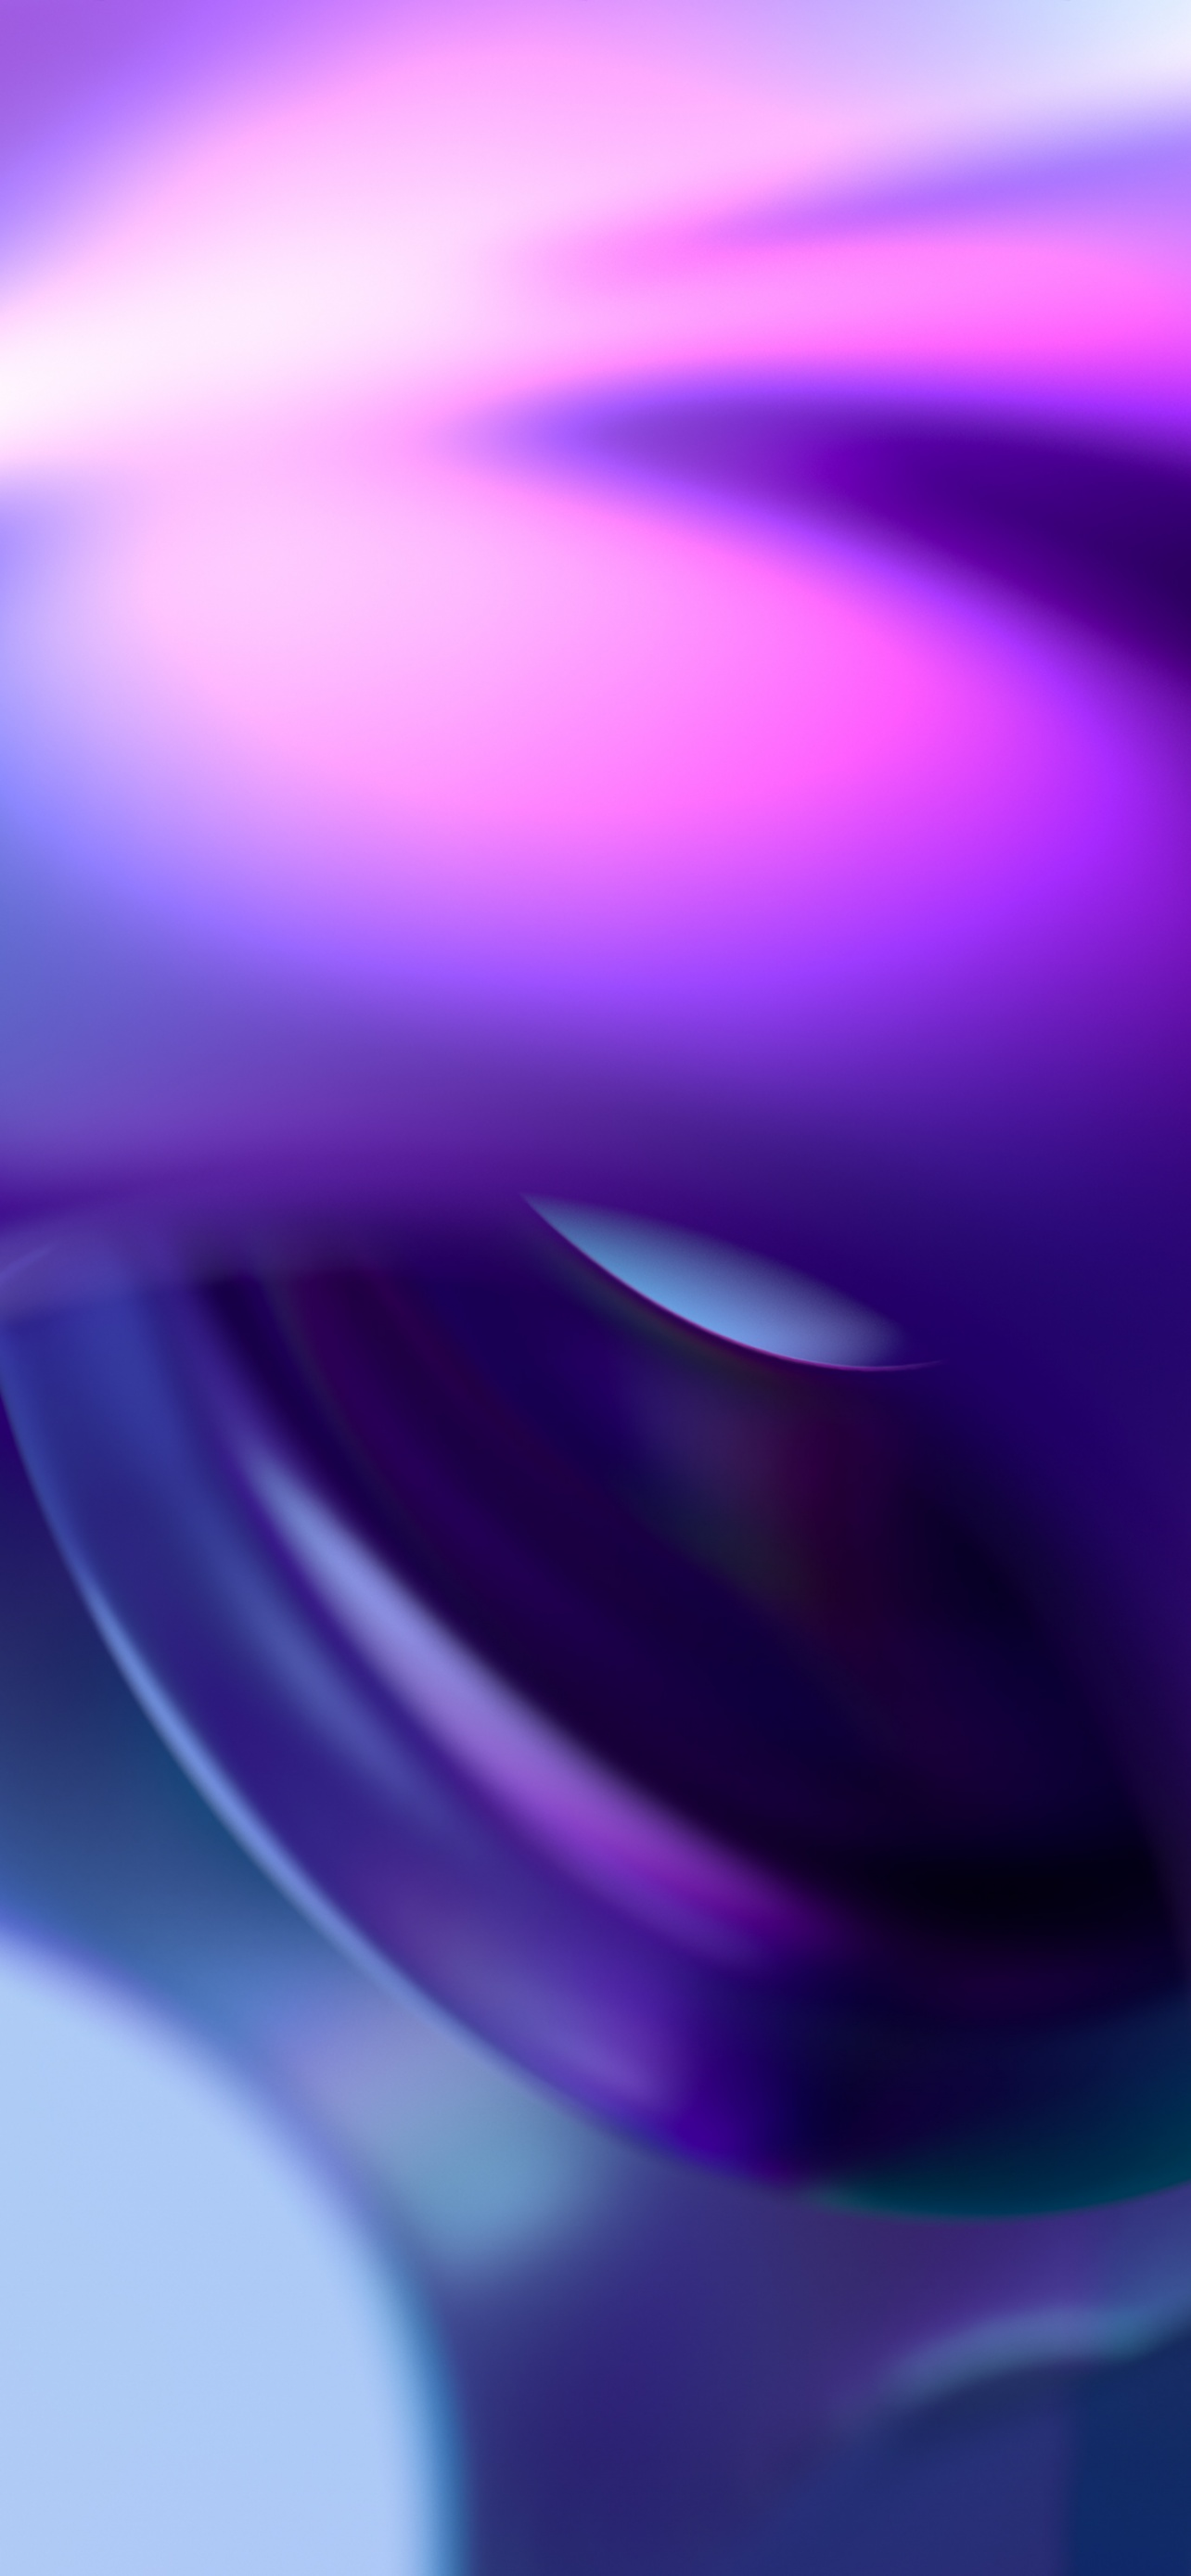 3D background Wallpaper 4K, Purple background, Abstract, #7658